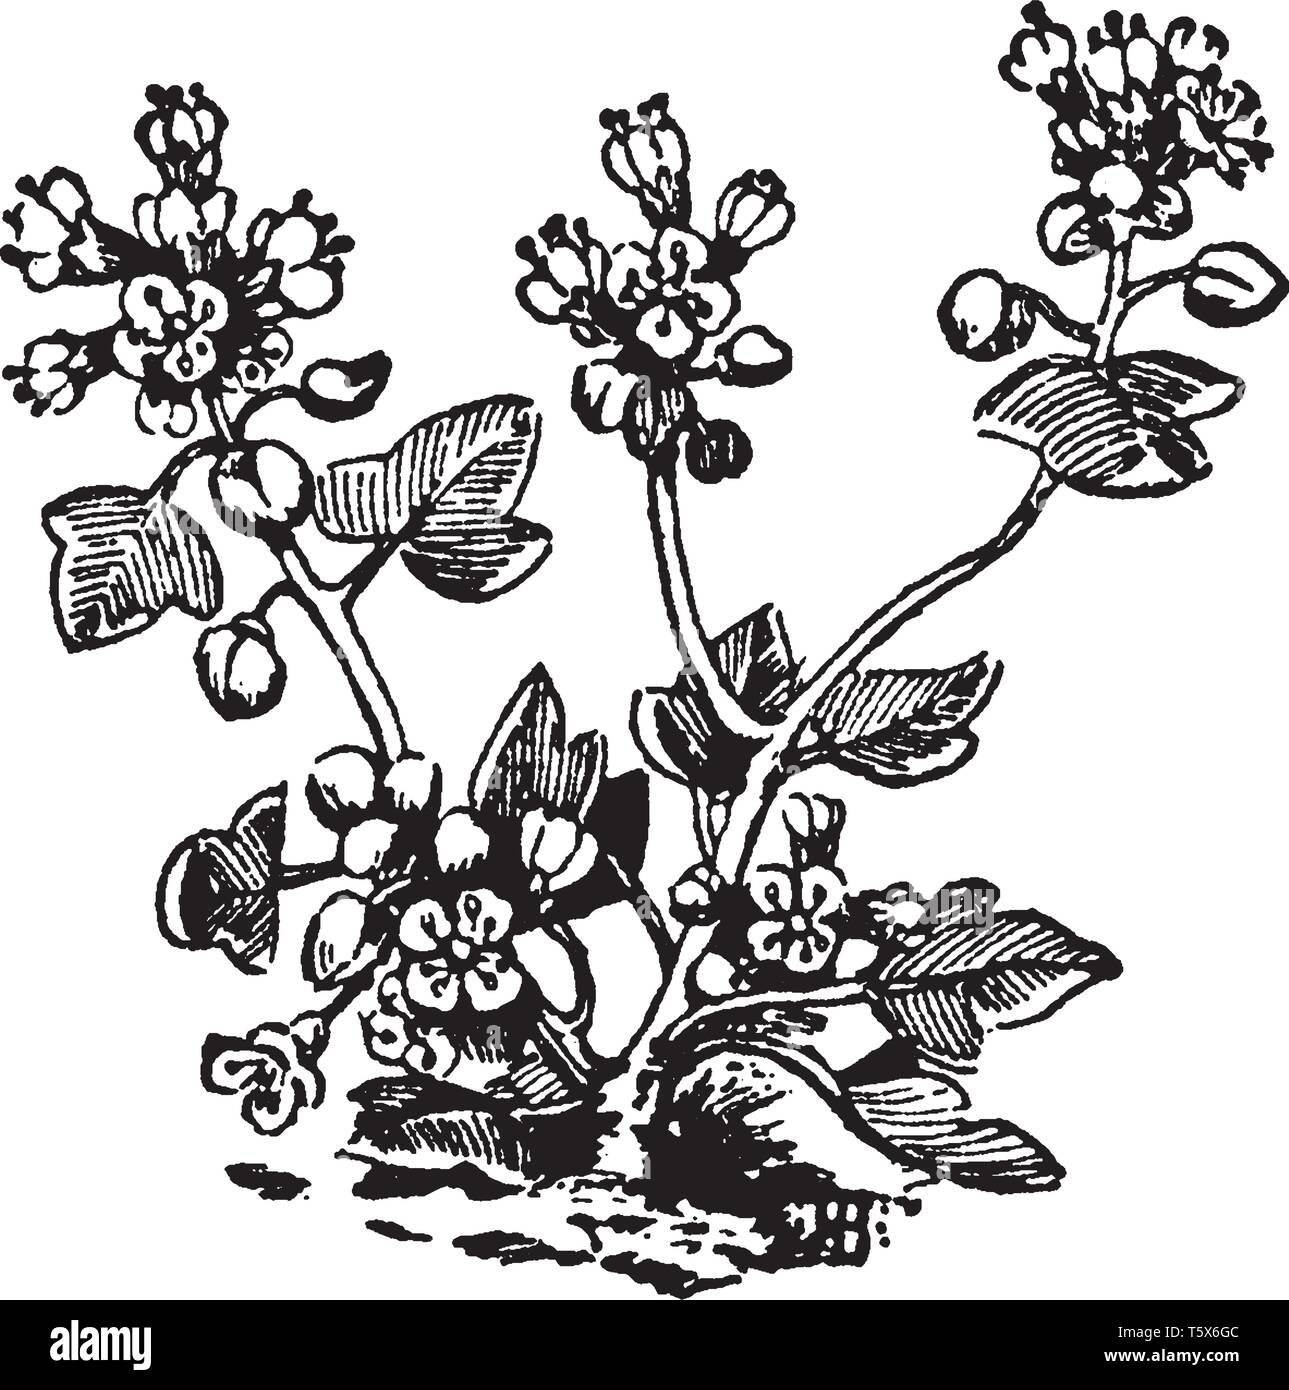 Cochlearia danica or Danish scurvygrass is a flowering plant of the genus Cochlearia in the family Brassicaceae, vintage line drawing or engraving ill Stock Vector